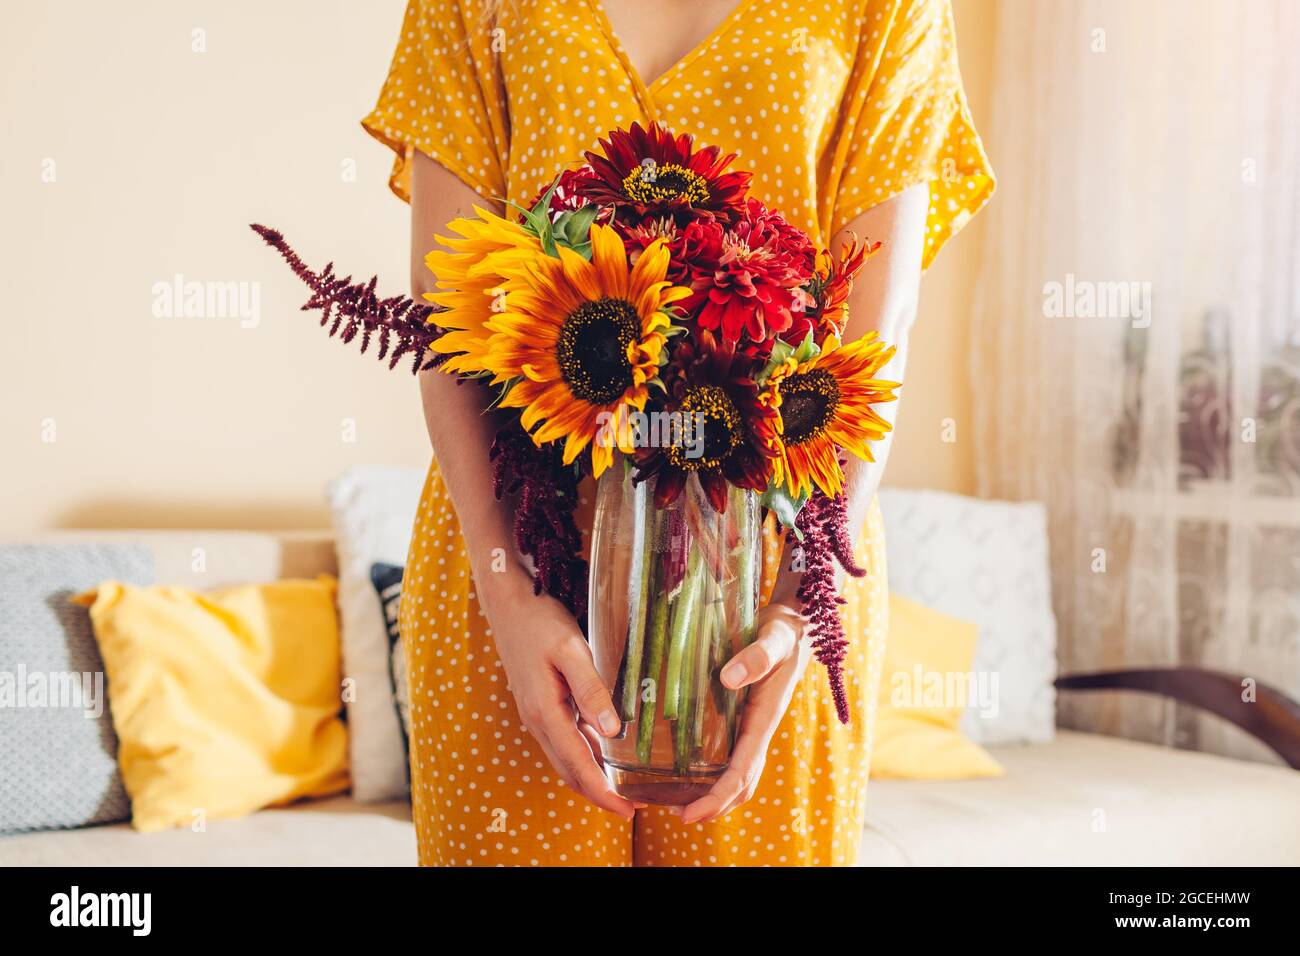 Woman holds vase with sunflowers amaranth and zinnia flowers. Bouquet of fall red yellow orange brown blooms at home. Stock Photo